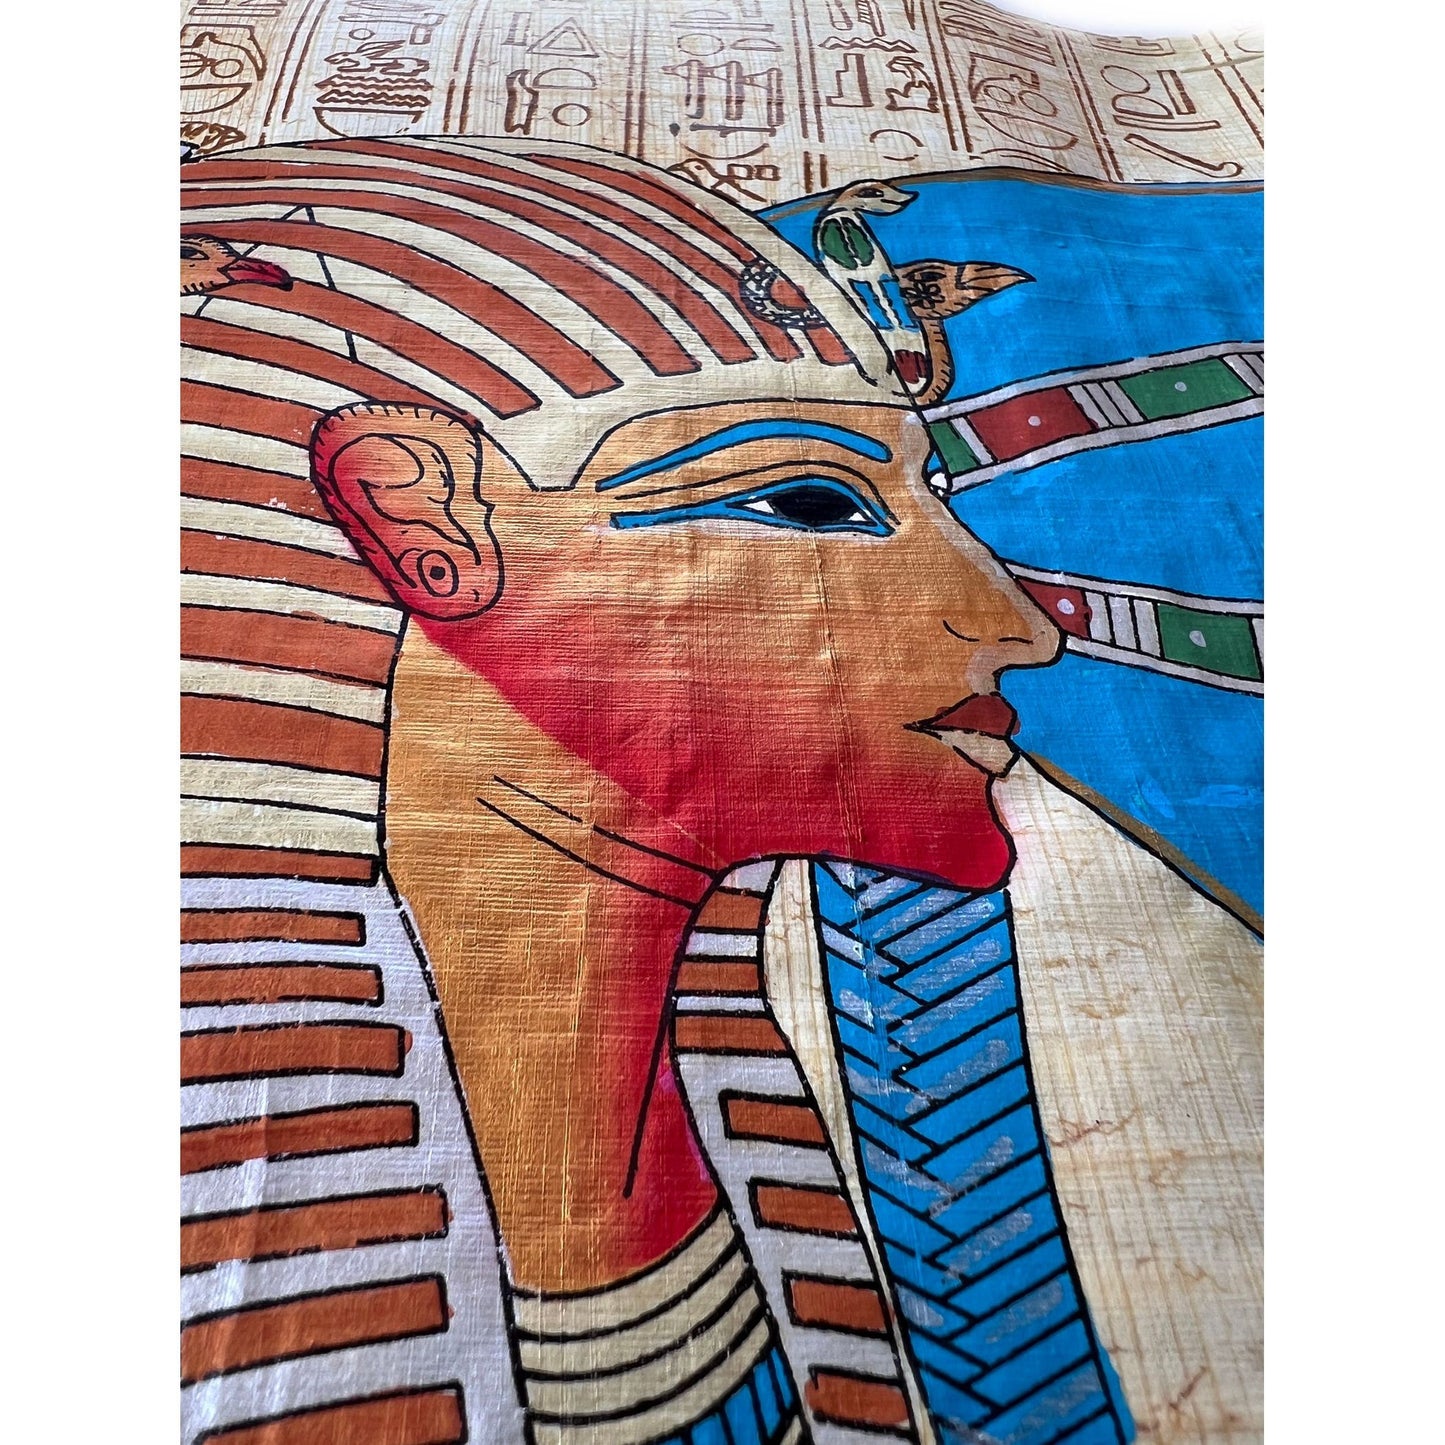 Egyptian Papyrus Painting Artwork for Walls, Ancient Gifts